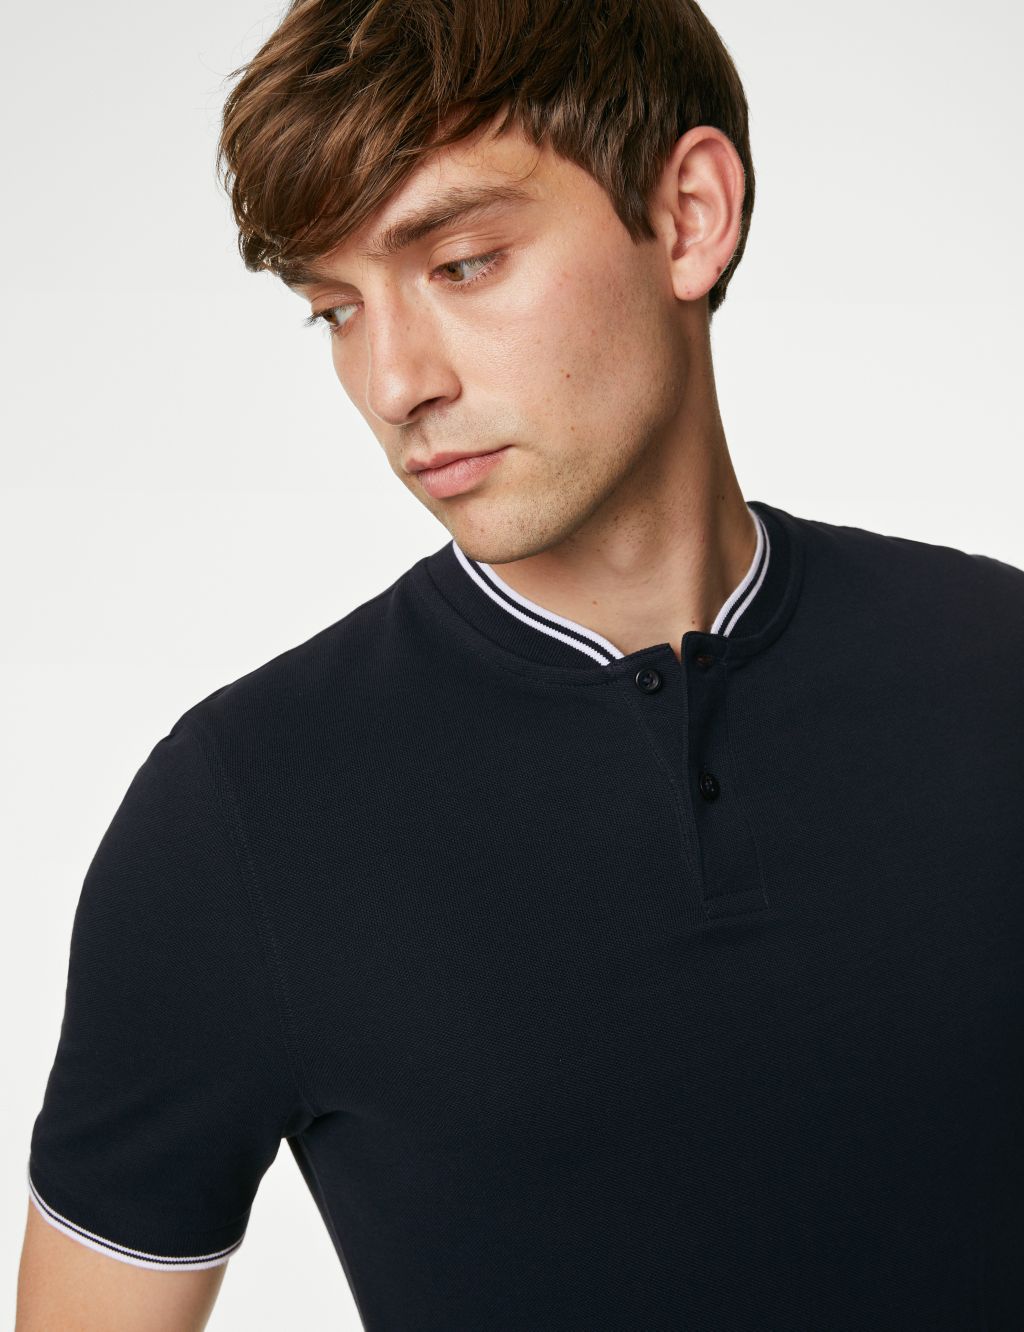 Men’s Holiday Shop Polo Shirts | M&S